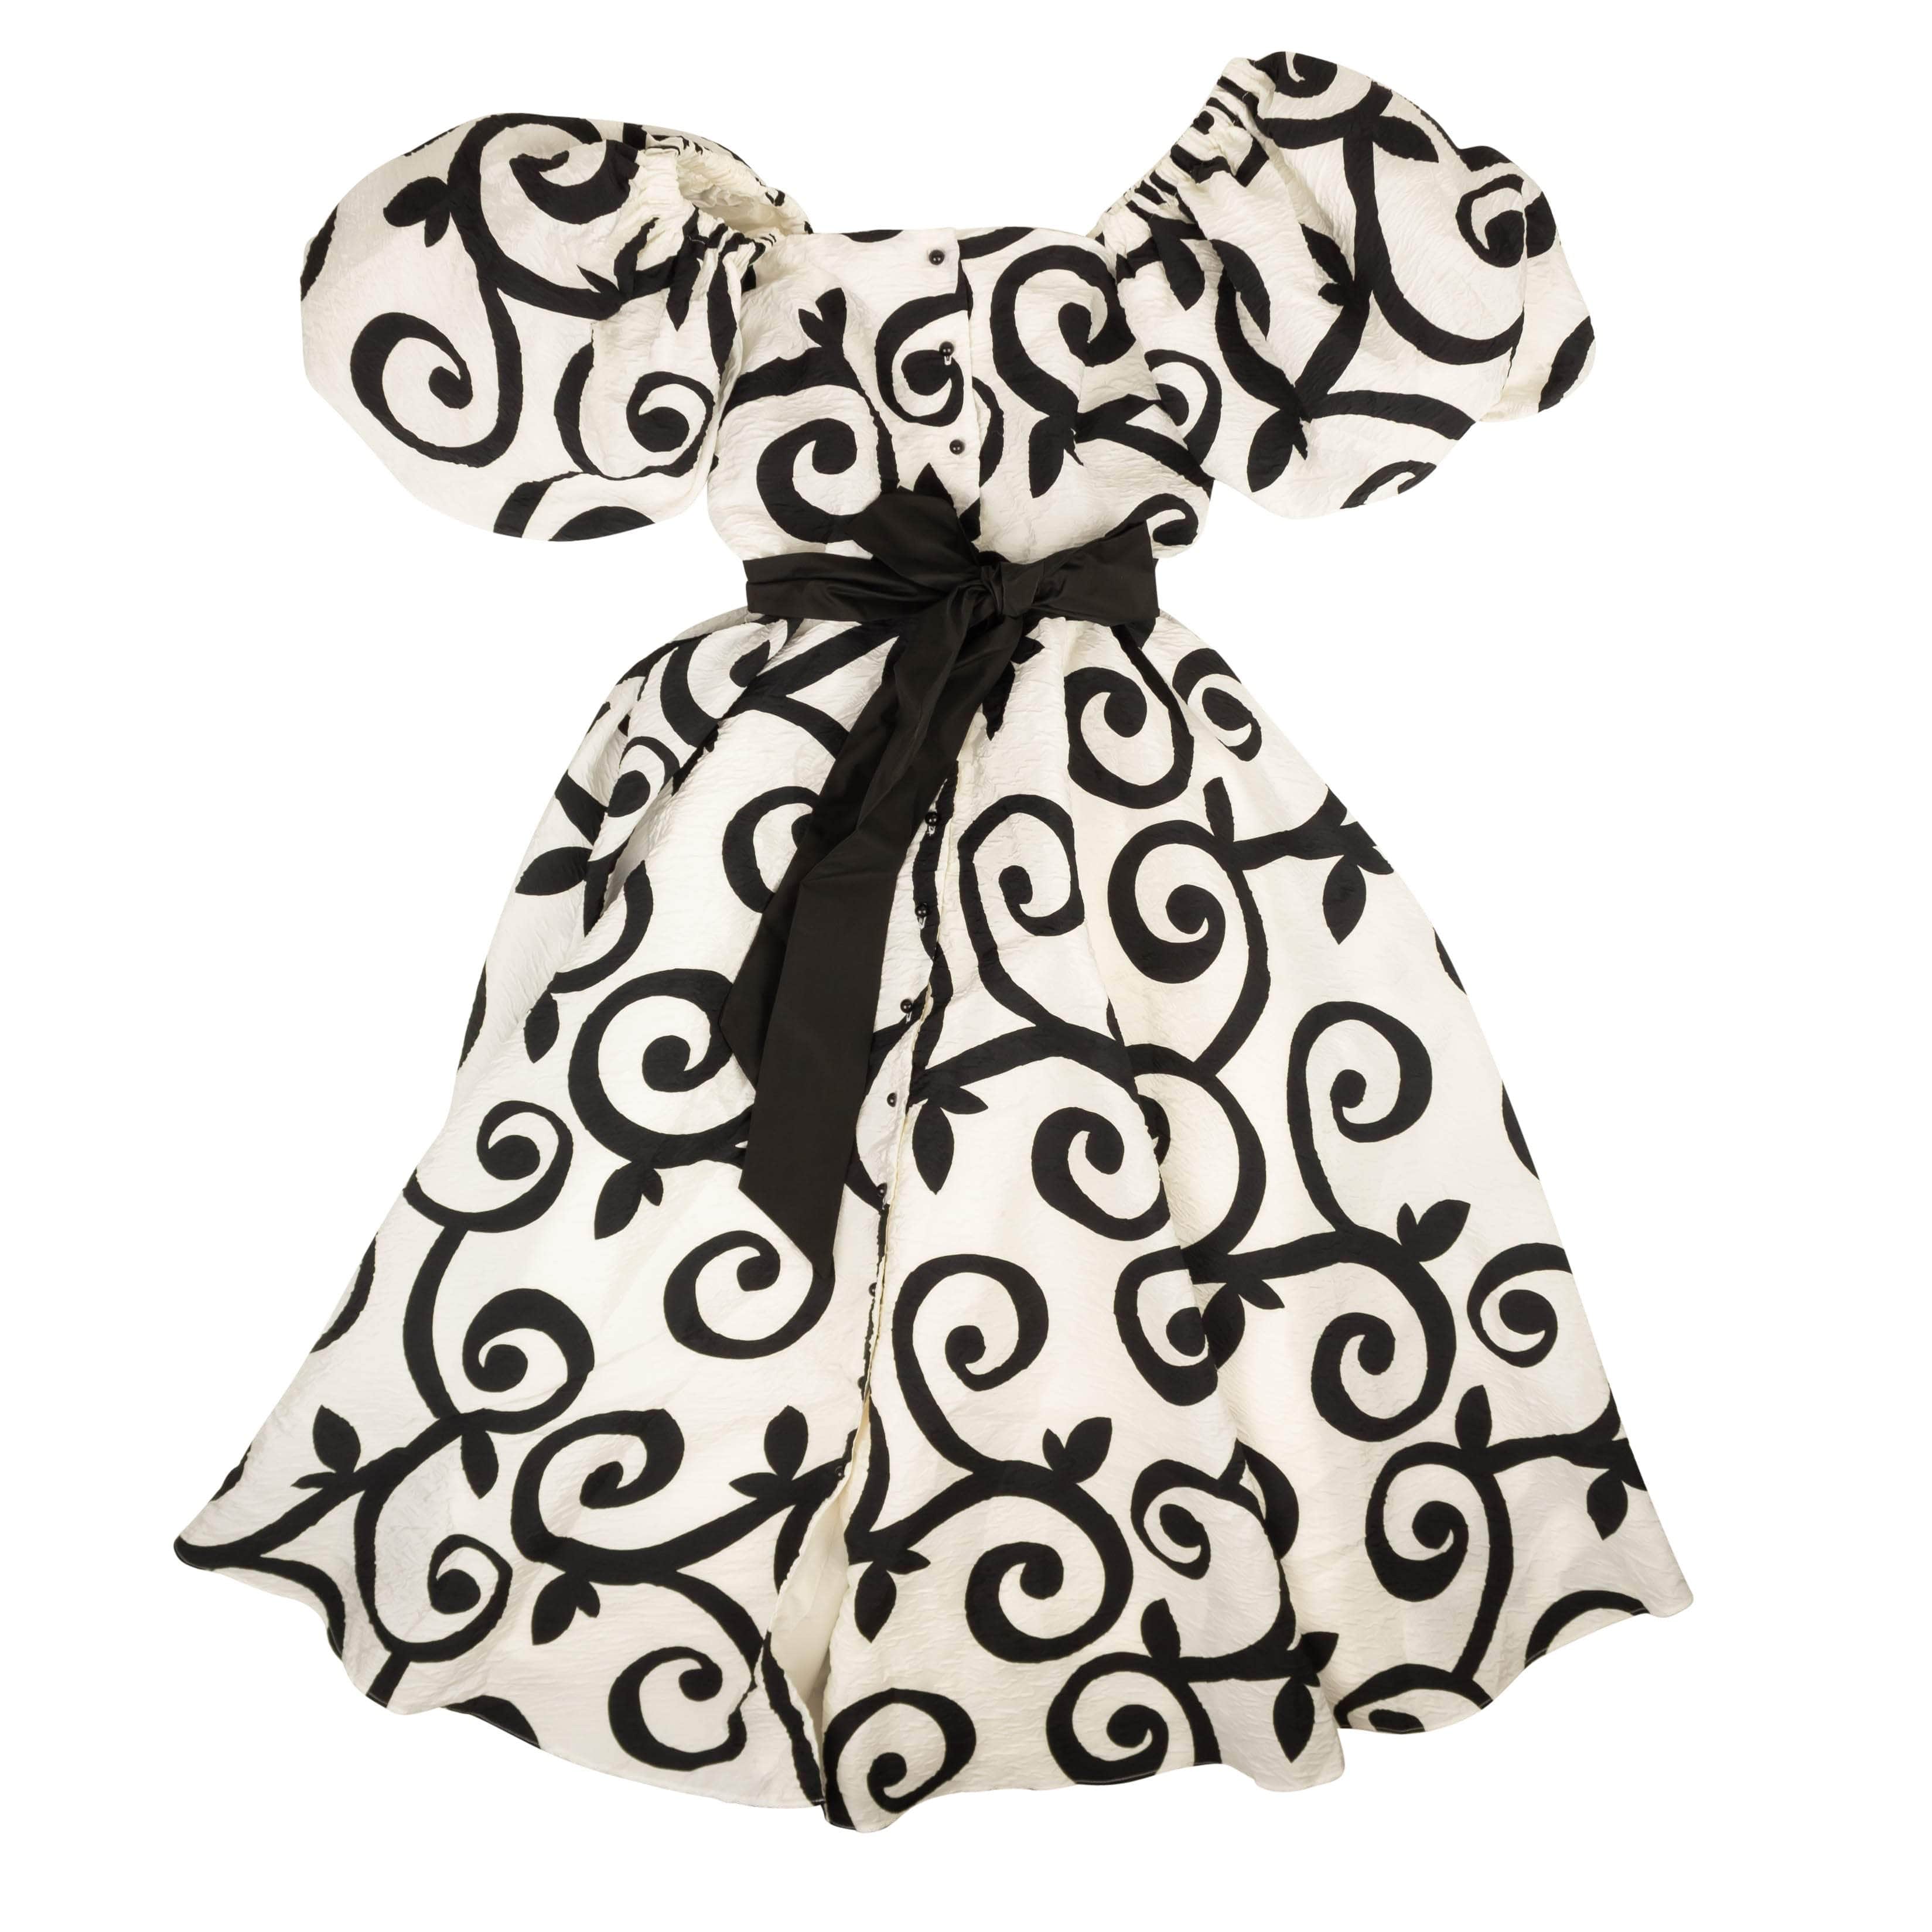 Rodarte 2000-5000, channelenable-all, chicmi, couponcollection, gender-womens, main-clothing, MixedApparel, rodarte, size-2, womens-formal-dresses 2 Black And White Cloque Swirl Dress 95-RDT-0013/2 95-RDT-0013/2